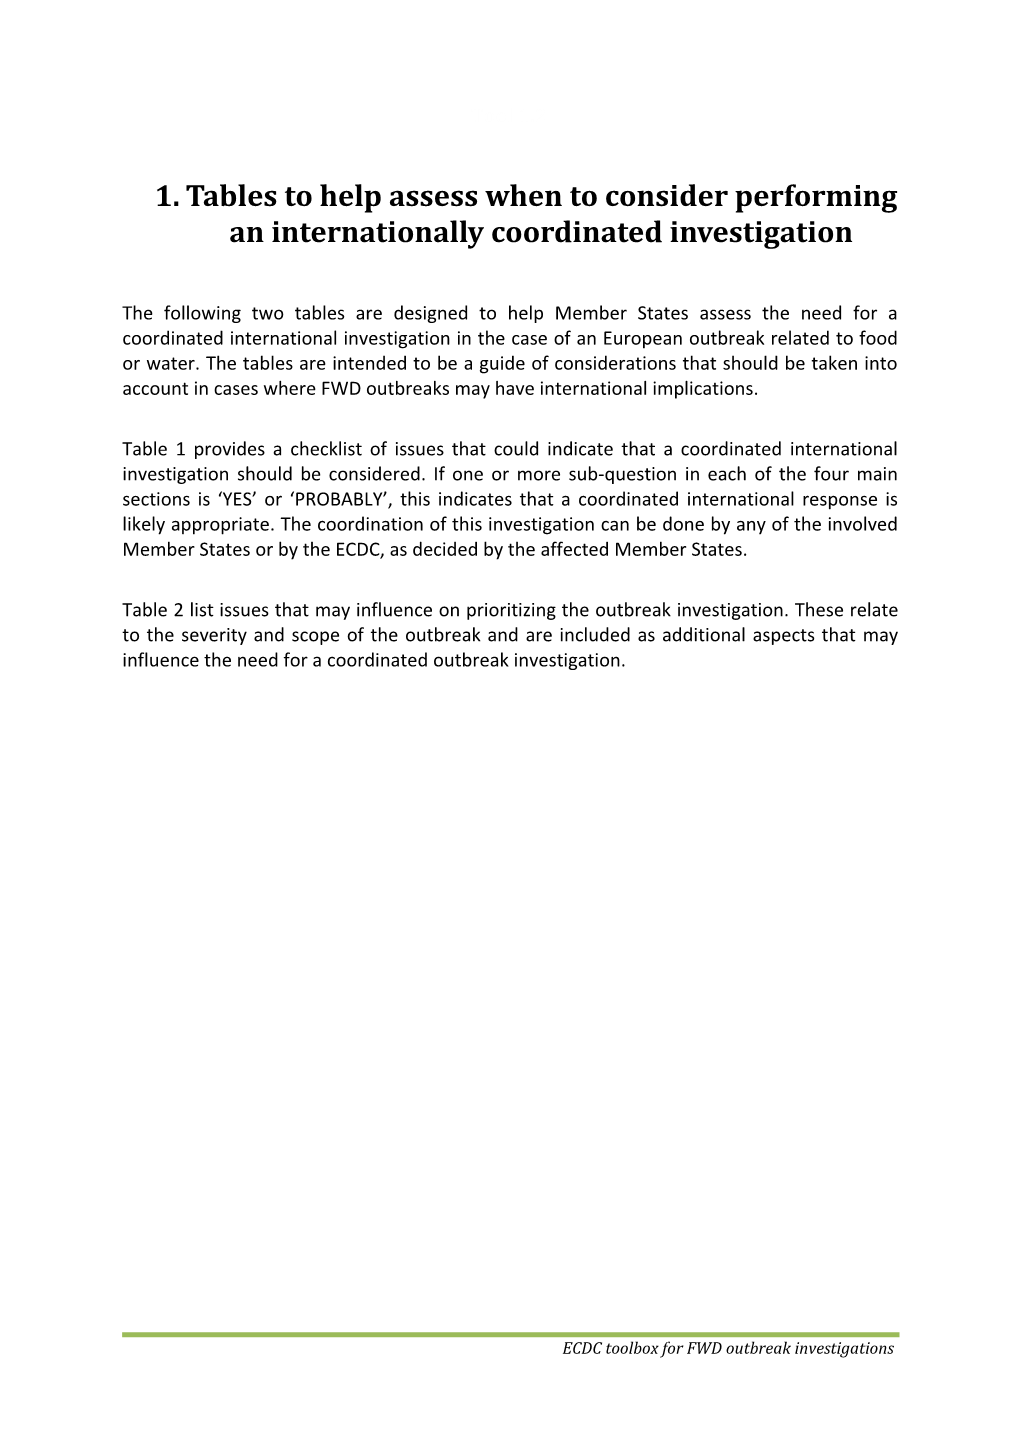 Tables to Help Assess When to Consider Performing an Internationally Coordinated Investigation